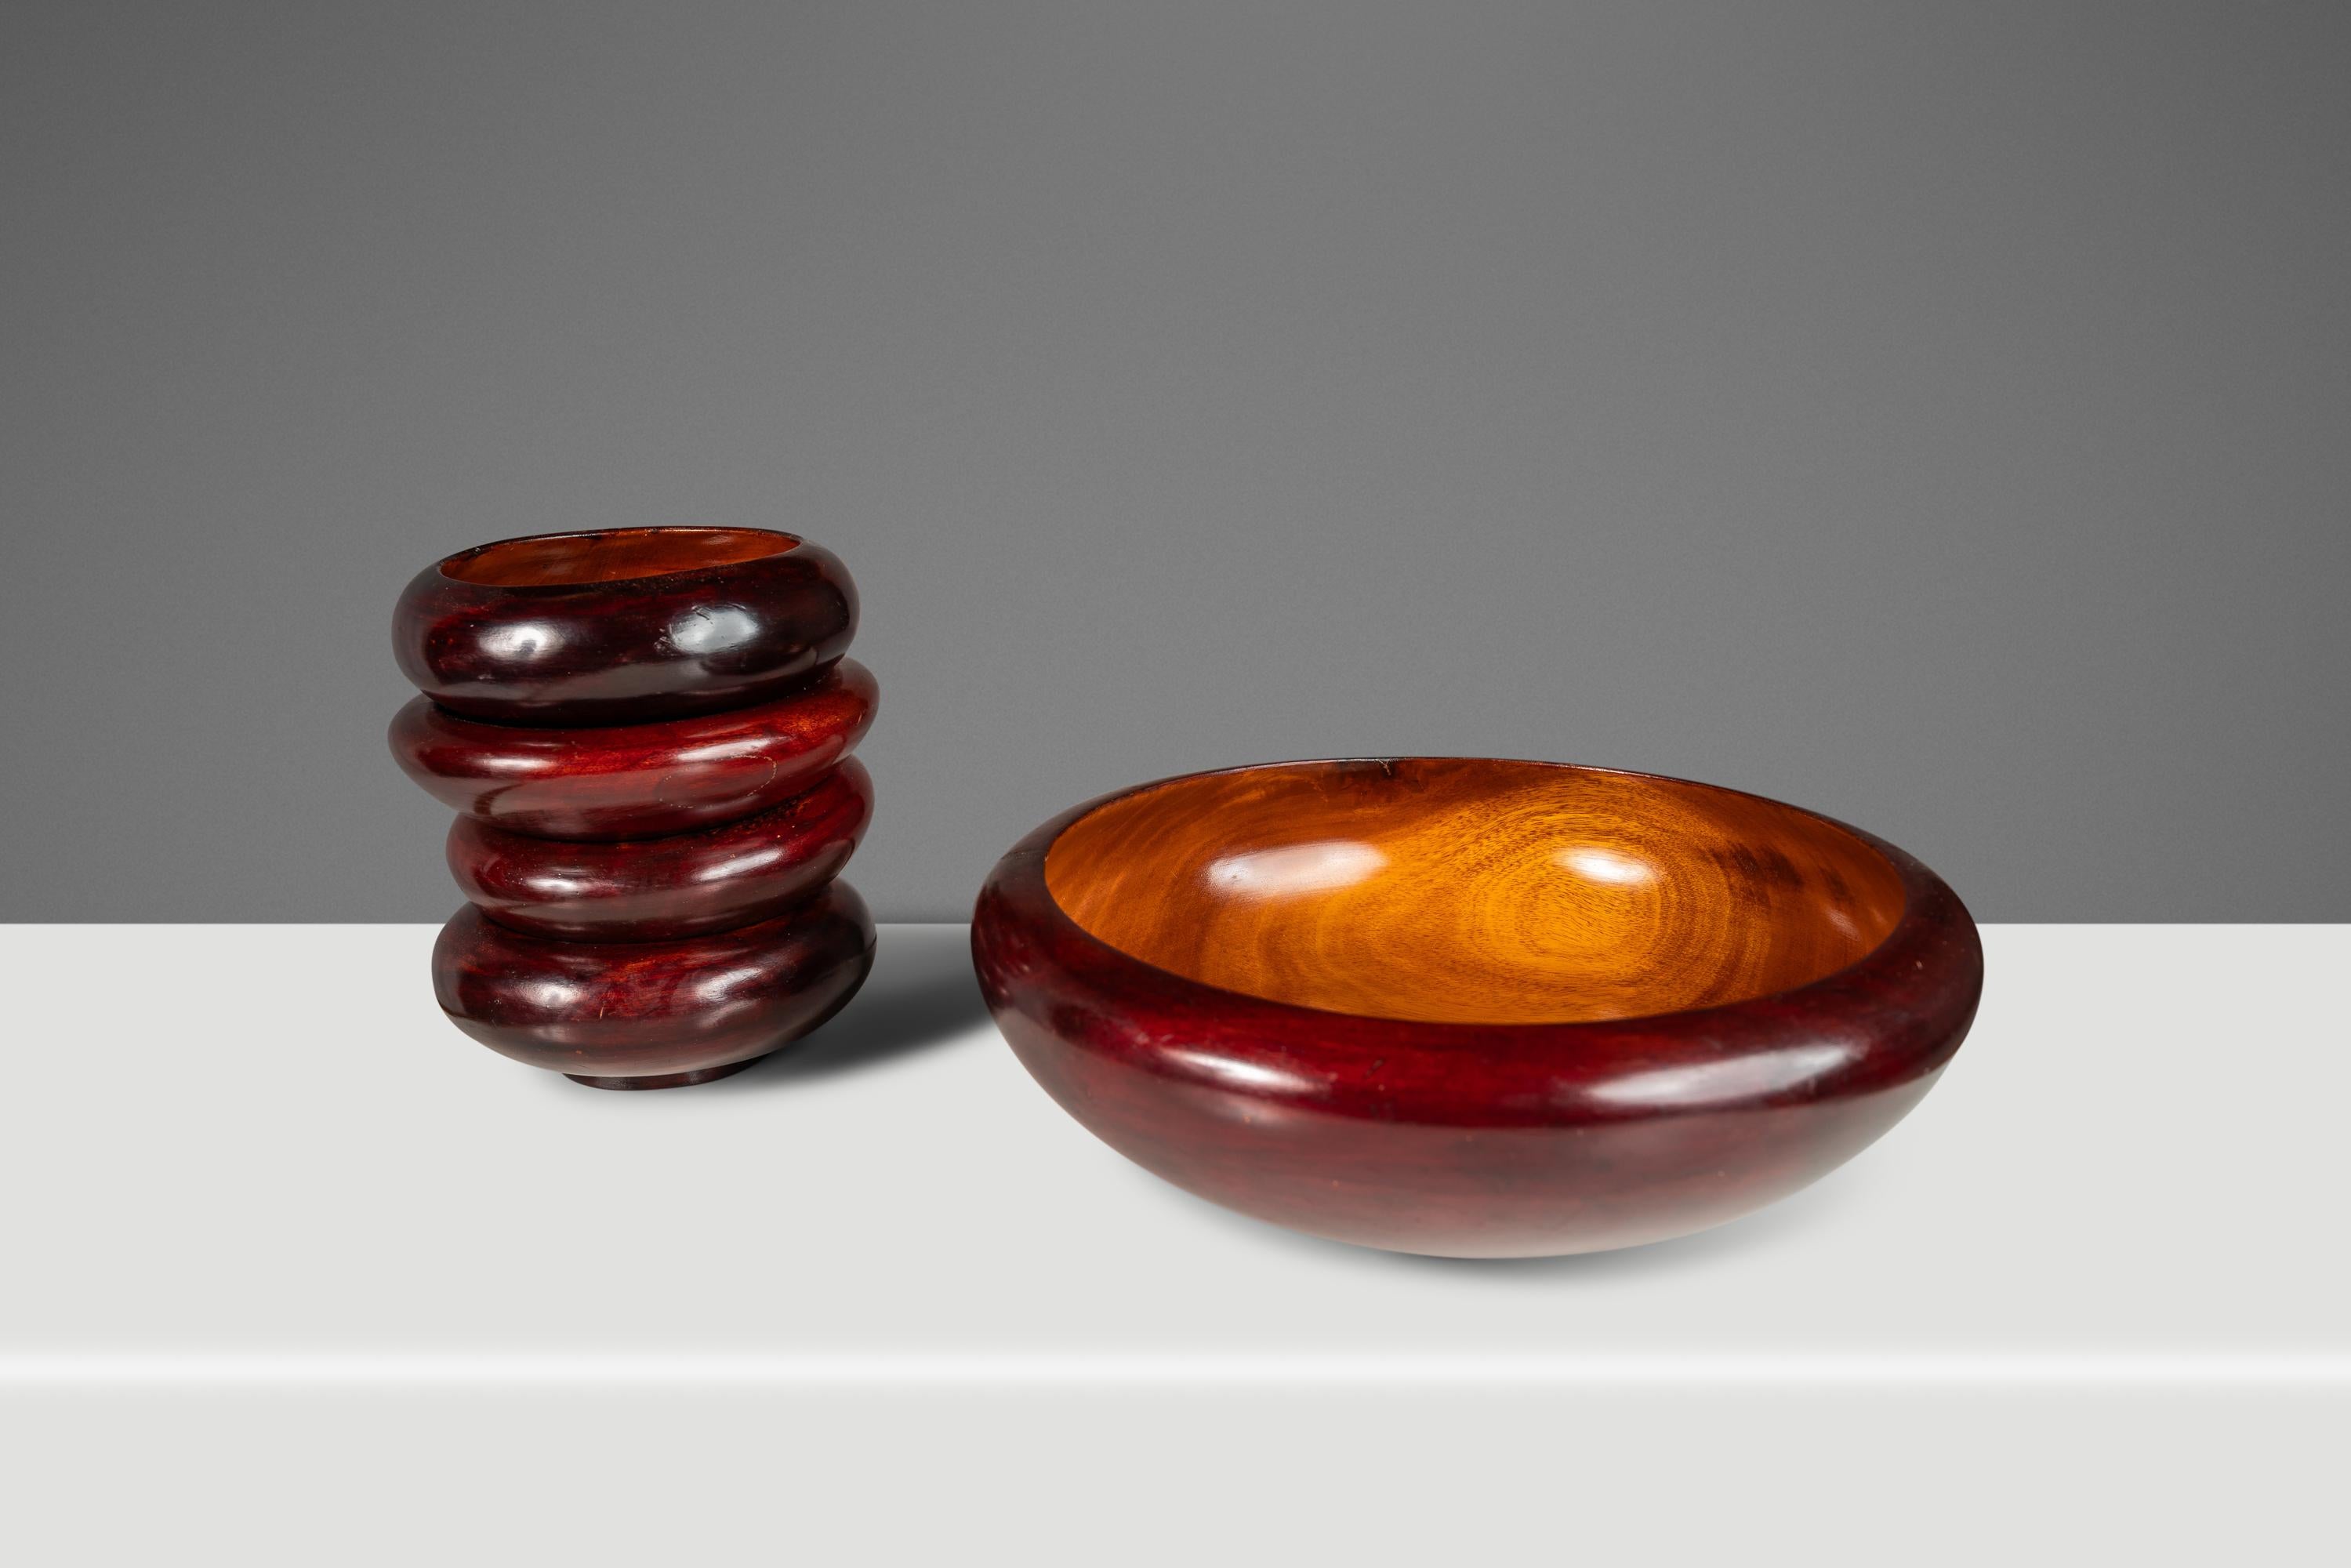 Set of 10 Organic Modern Hand-Turned Cherry Wood Serving Bowls, USA, c. 1960s For Sale 9